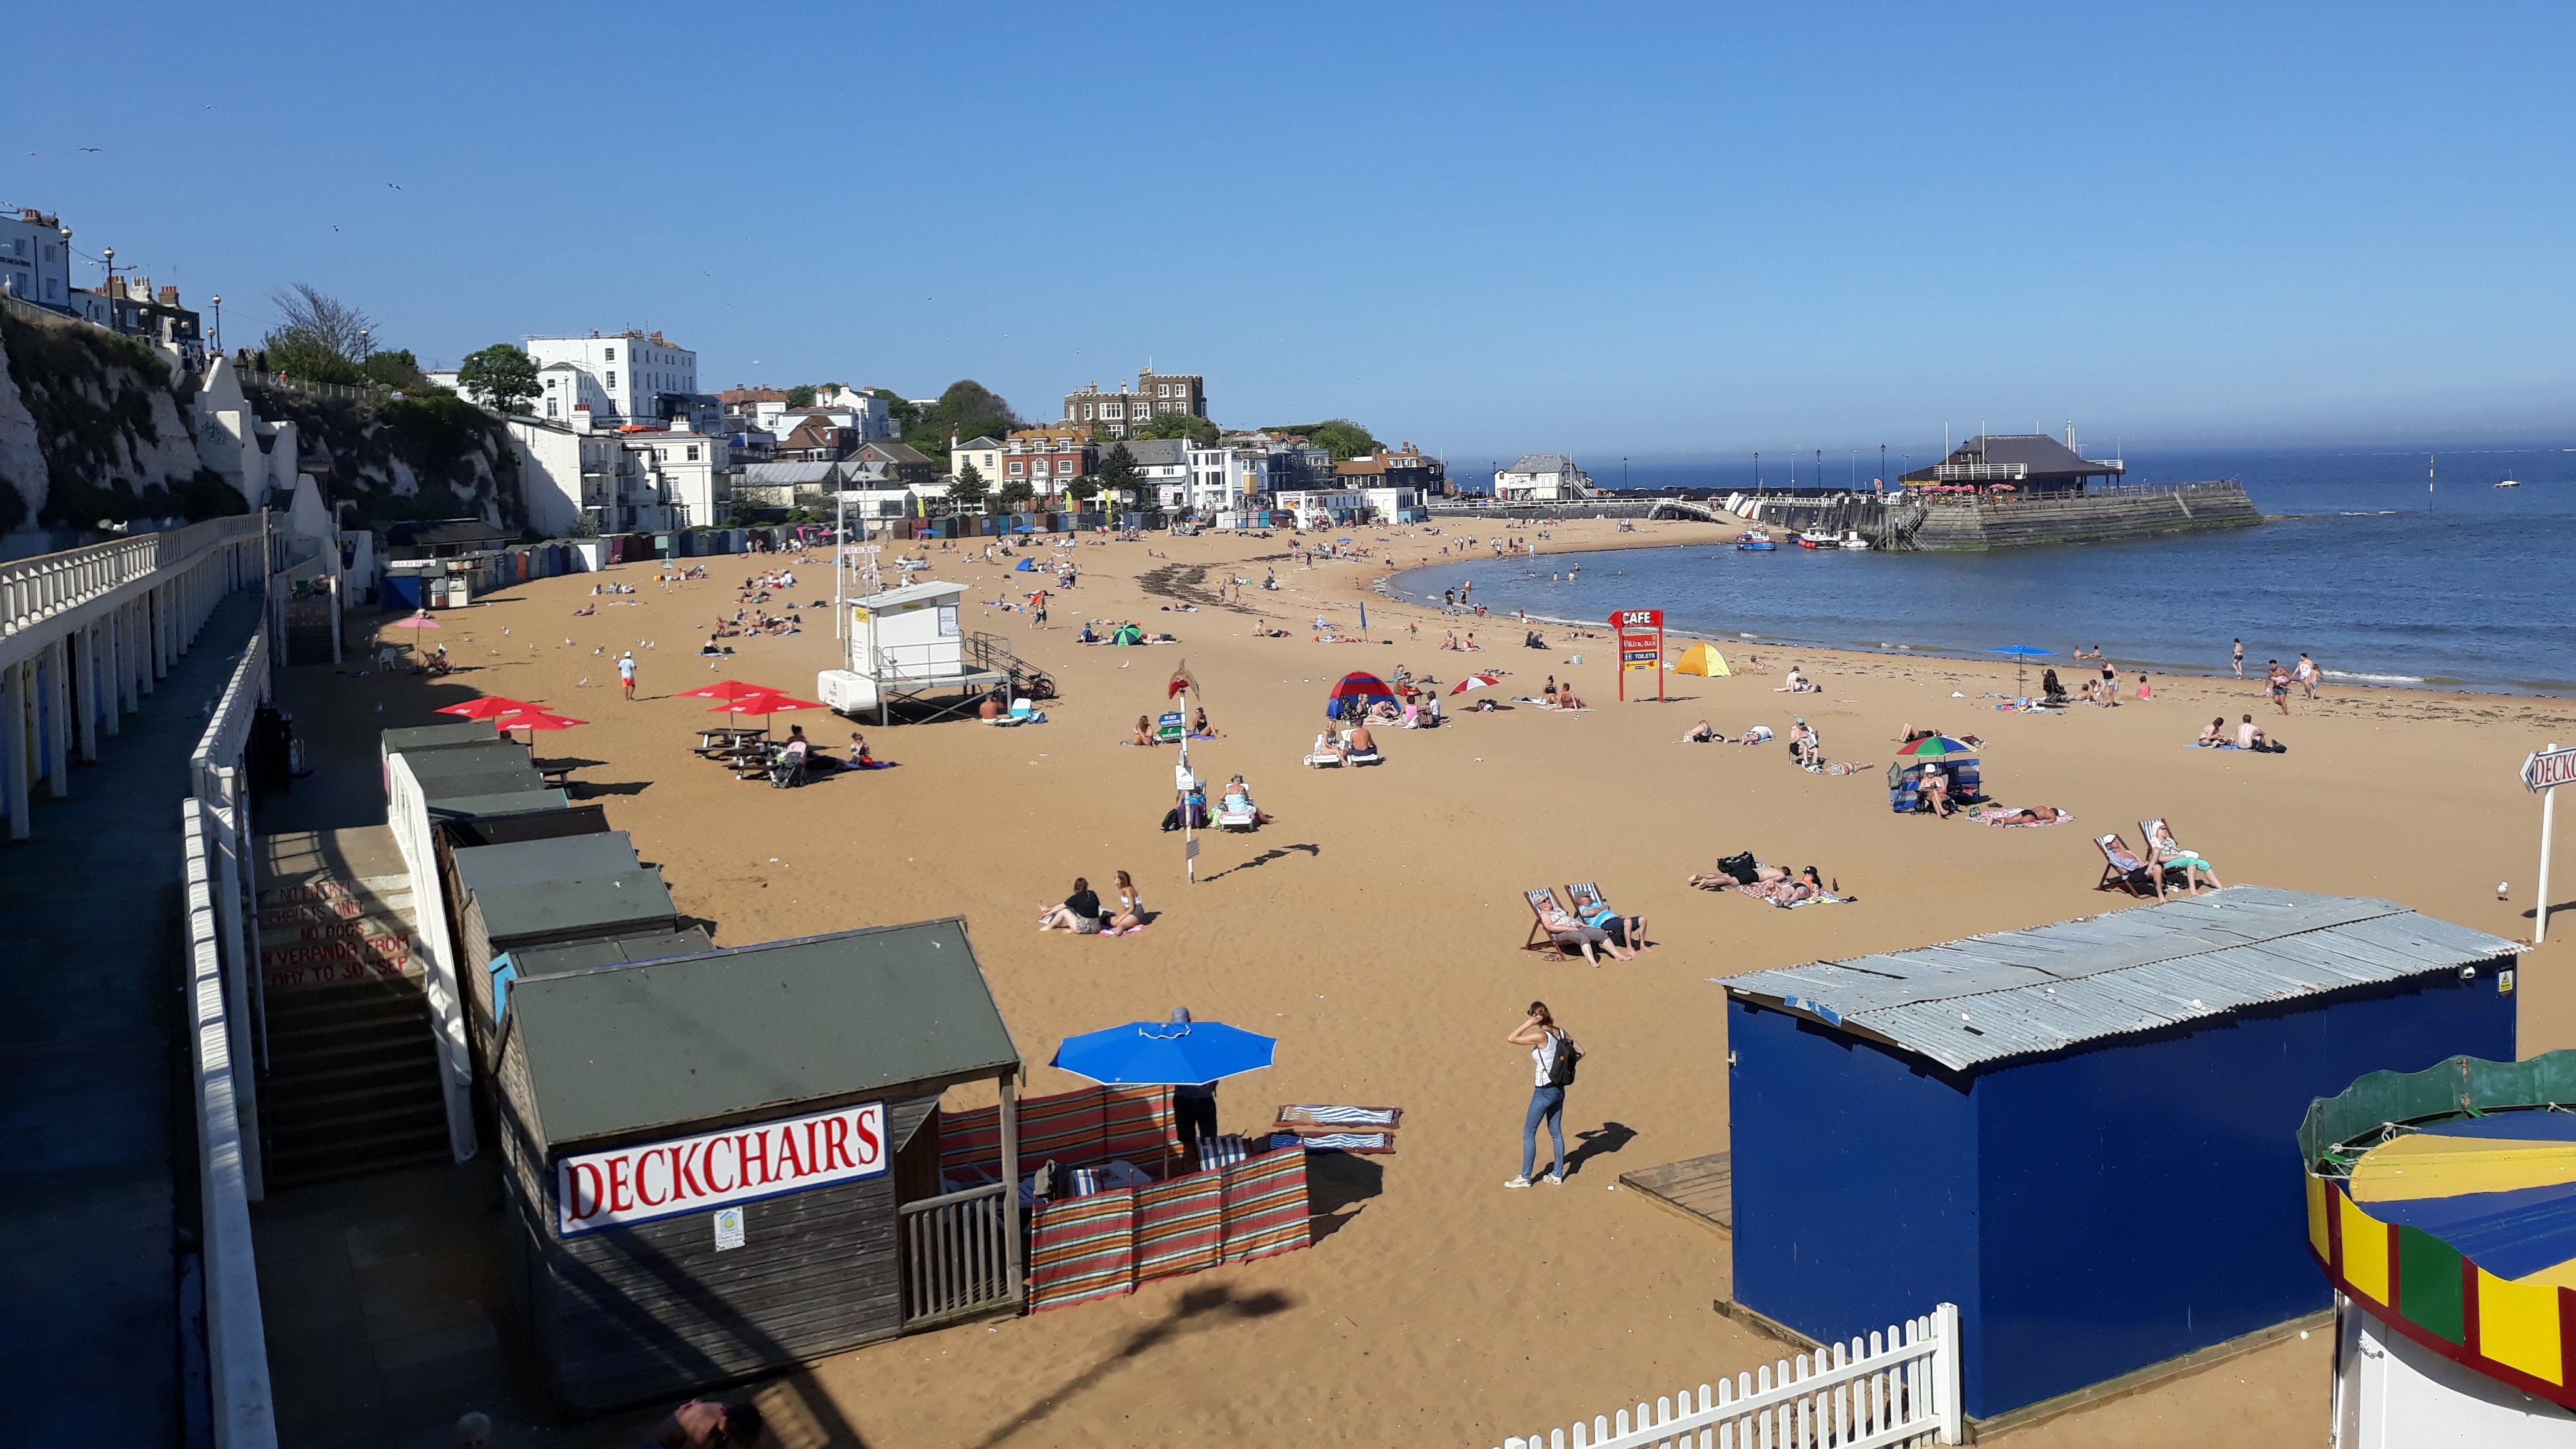 Viking Bay on the hottest May Bank Holiday on record